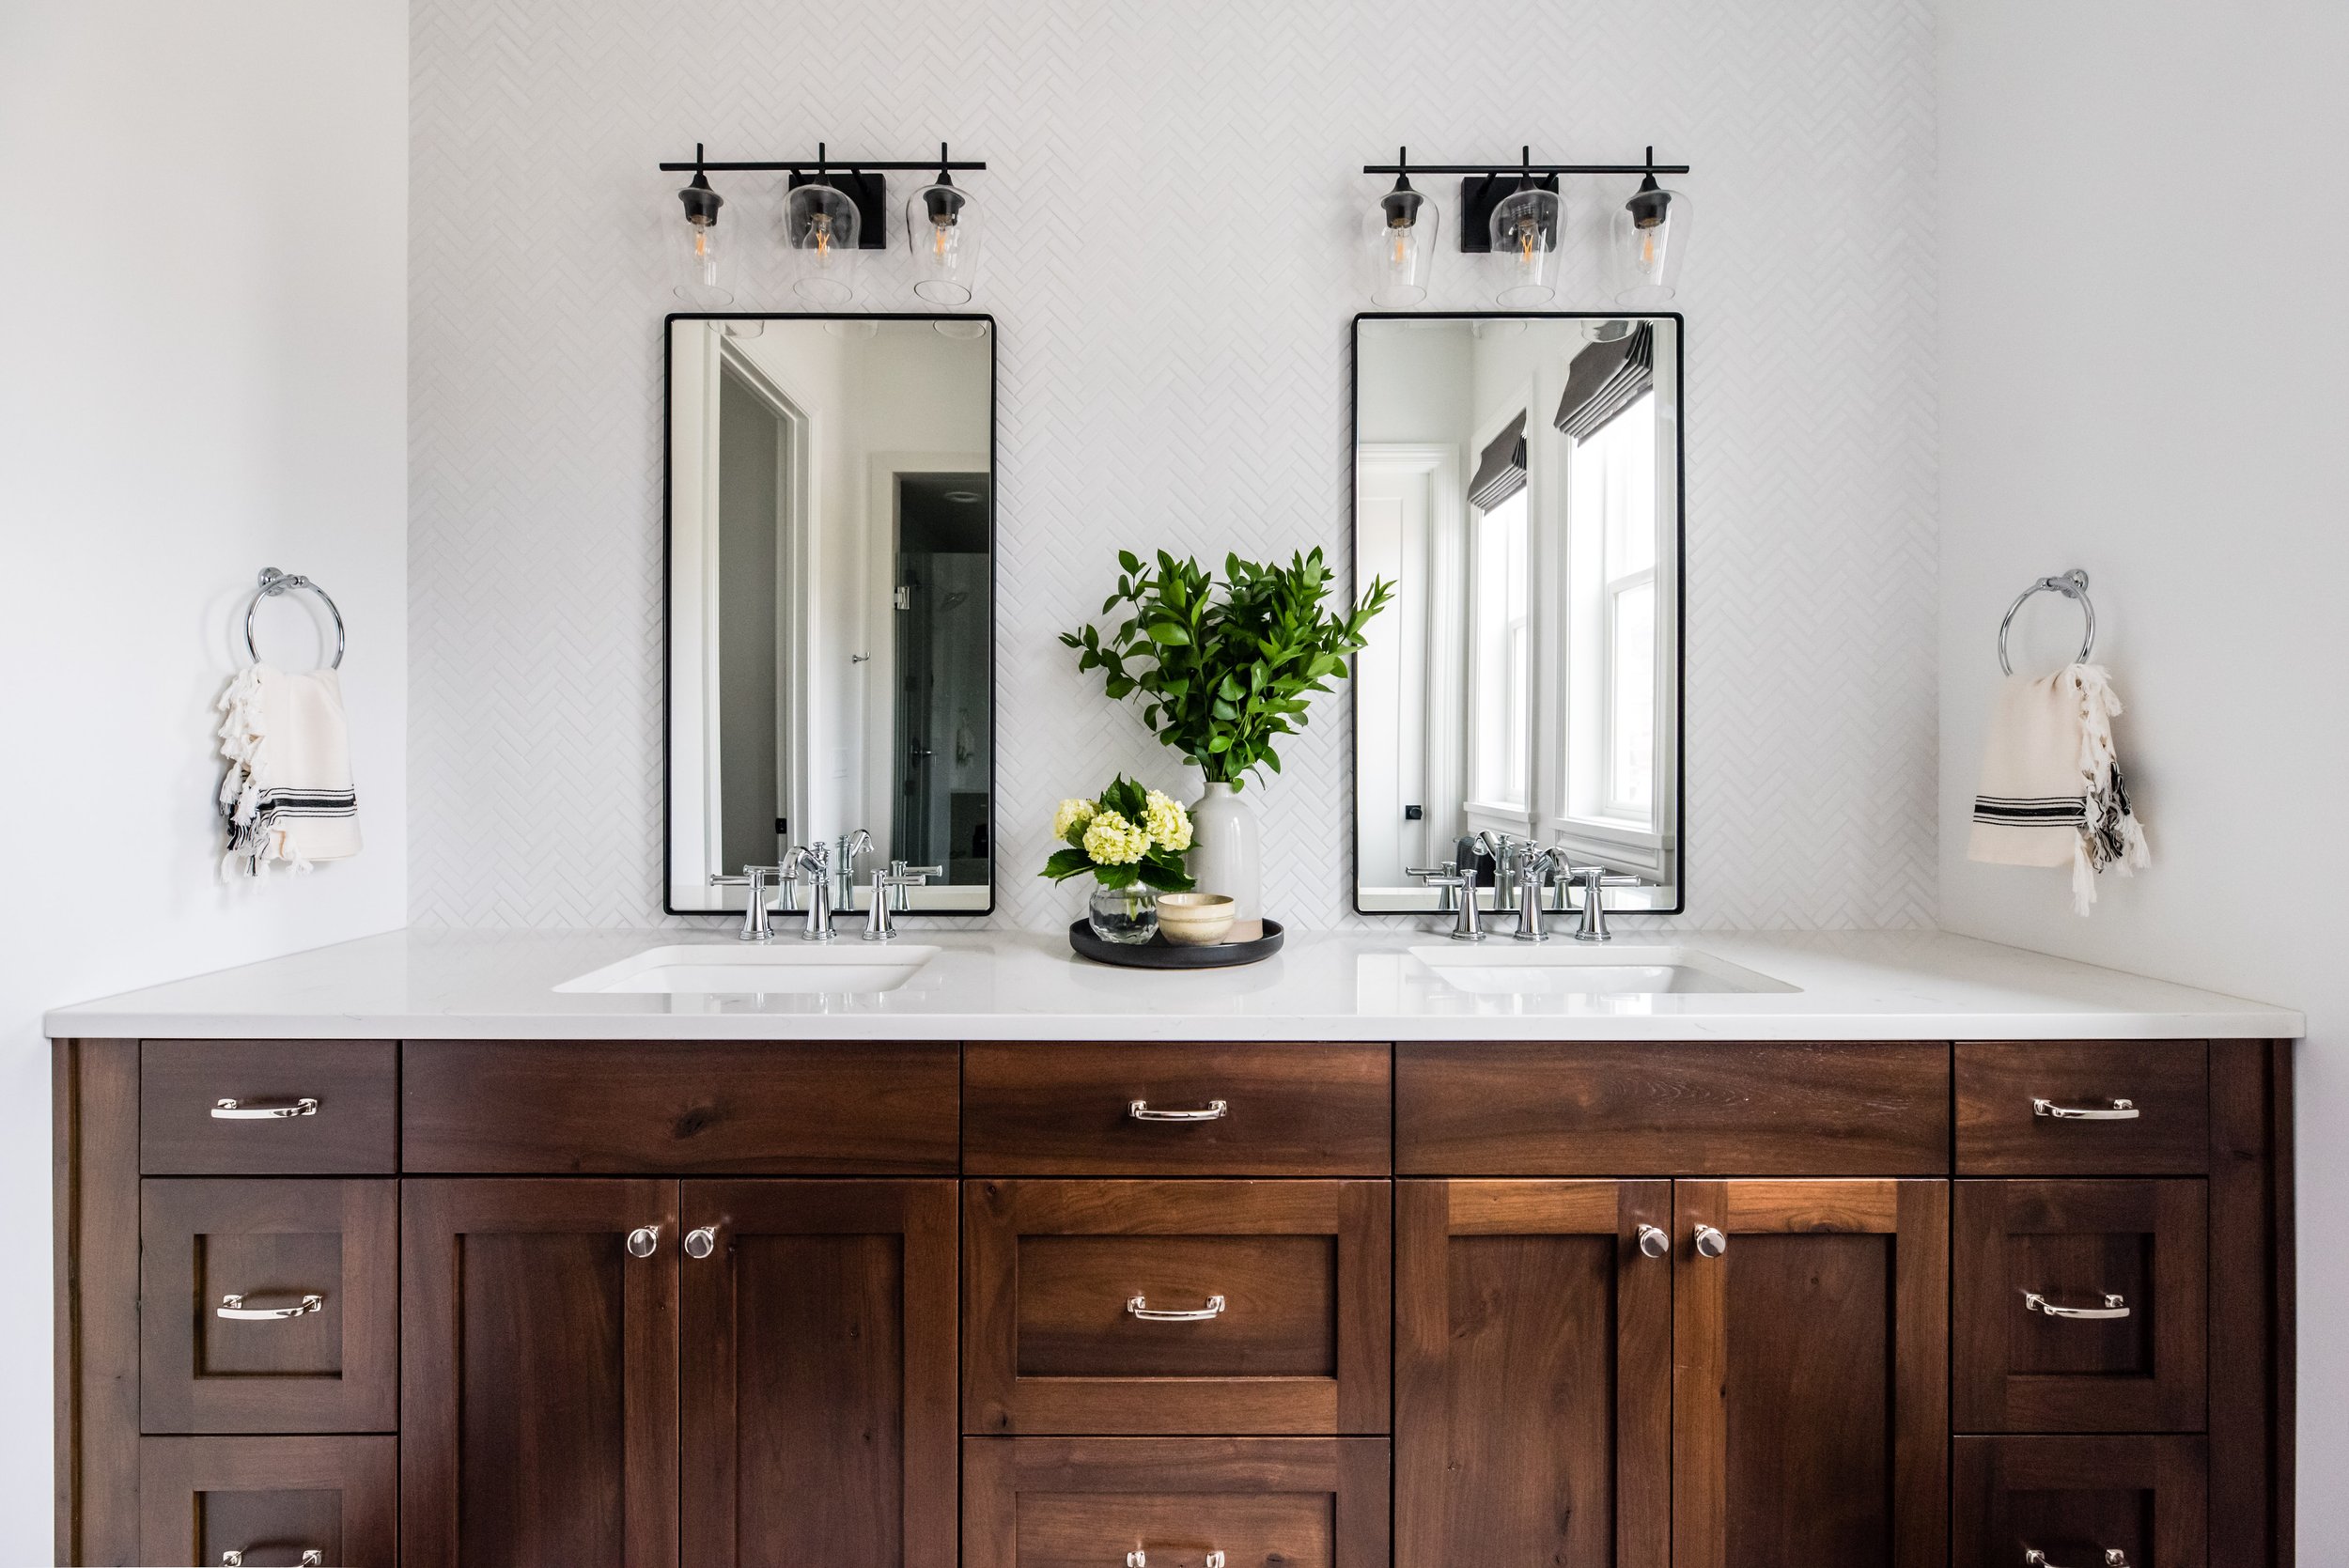  Picking out the right countertop for a master or guest bathroom in your new build in Logan, Utah, with Liz Powell Design. #LizPowellDesign #InteriorDesignUtah #LizPowellDesign #InteriorDesignUtah #InteriorDesigner #buildingahome #countertops #dreamh